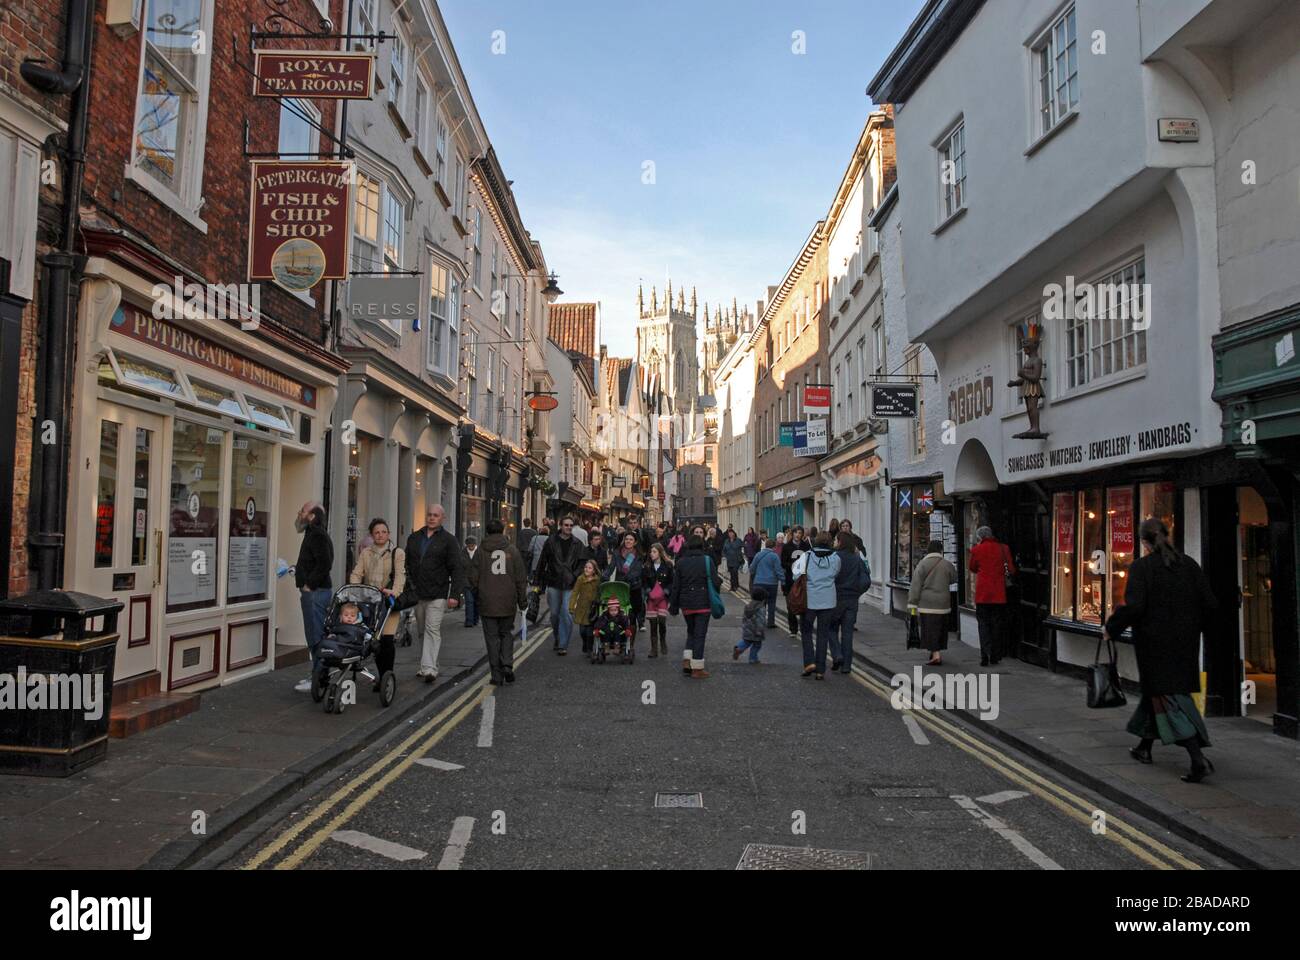 Shoppers and visitors in busy Low Petergate leading into Shambles in the old historical quarter of the city of York in Yorkshire, Britain.   A street Stock Photo